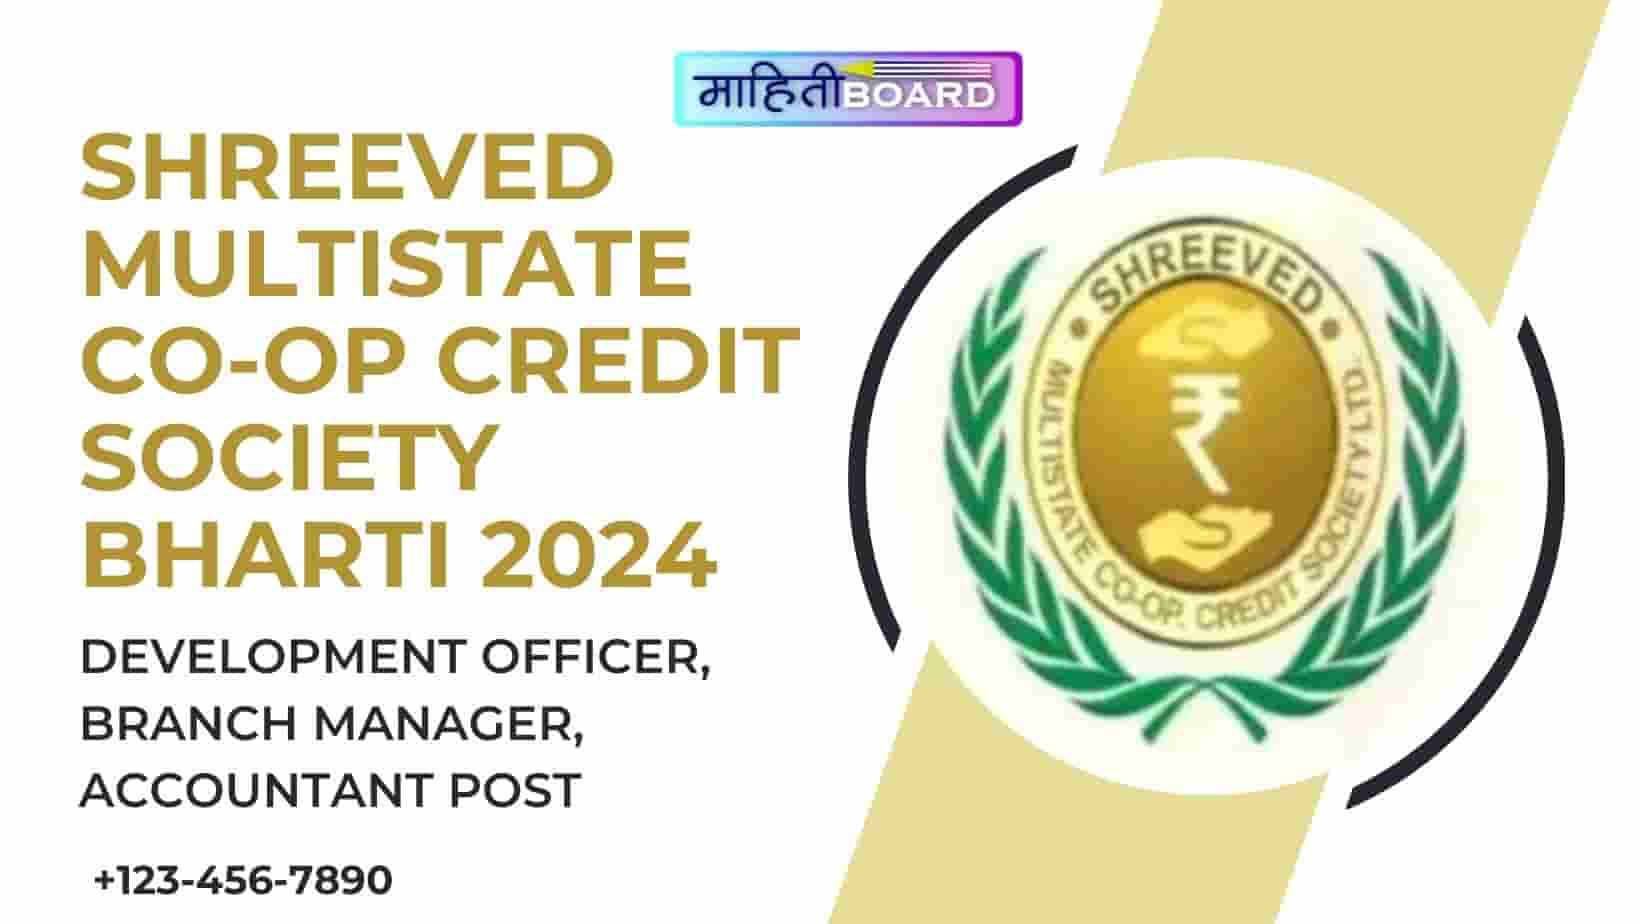 Shreeved Multistate Co-Op Credit Society Bharti 2024